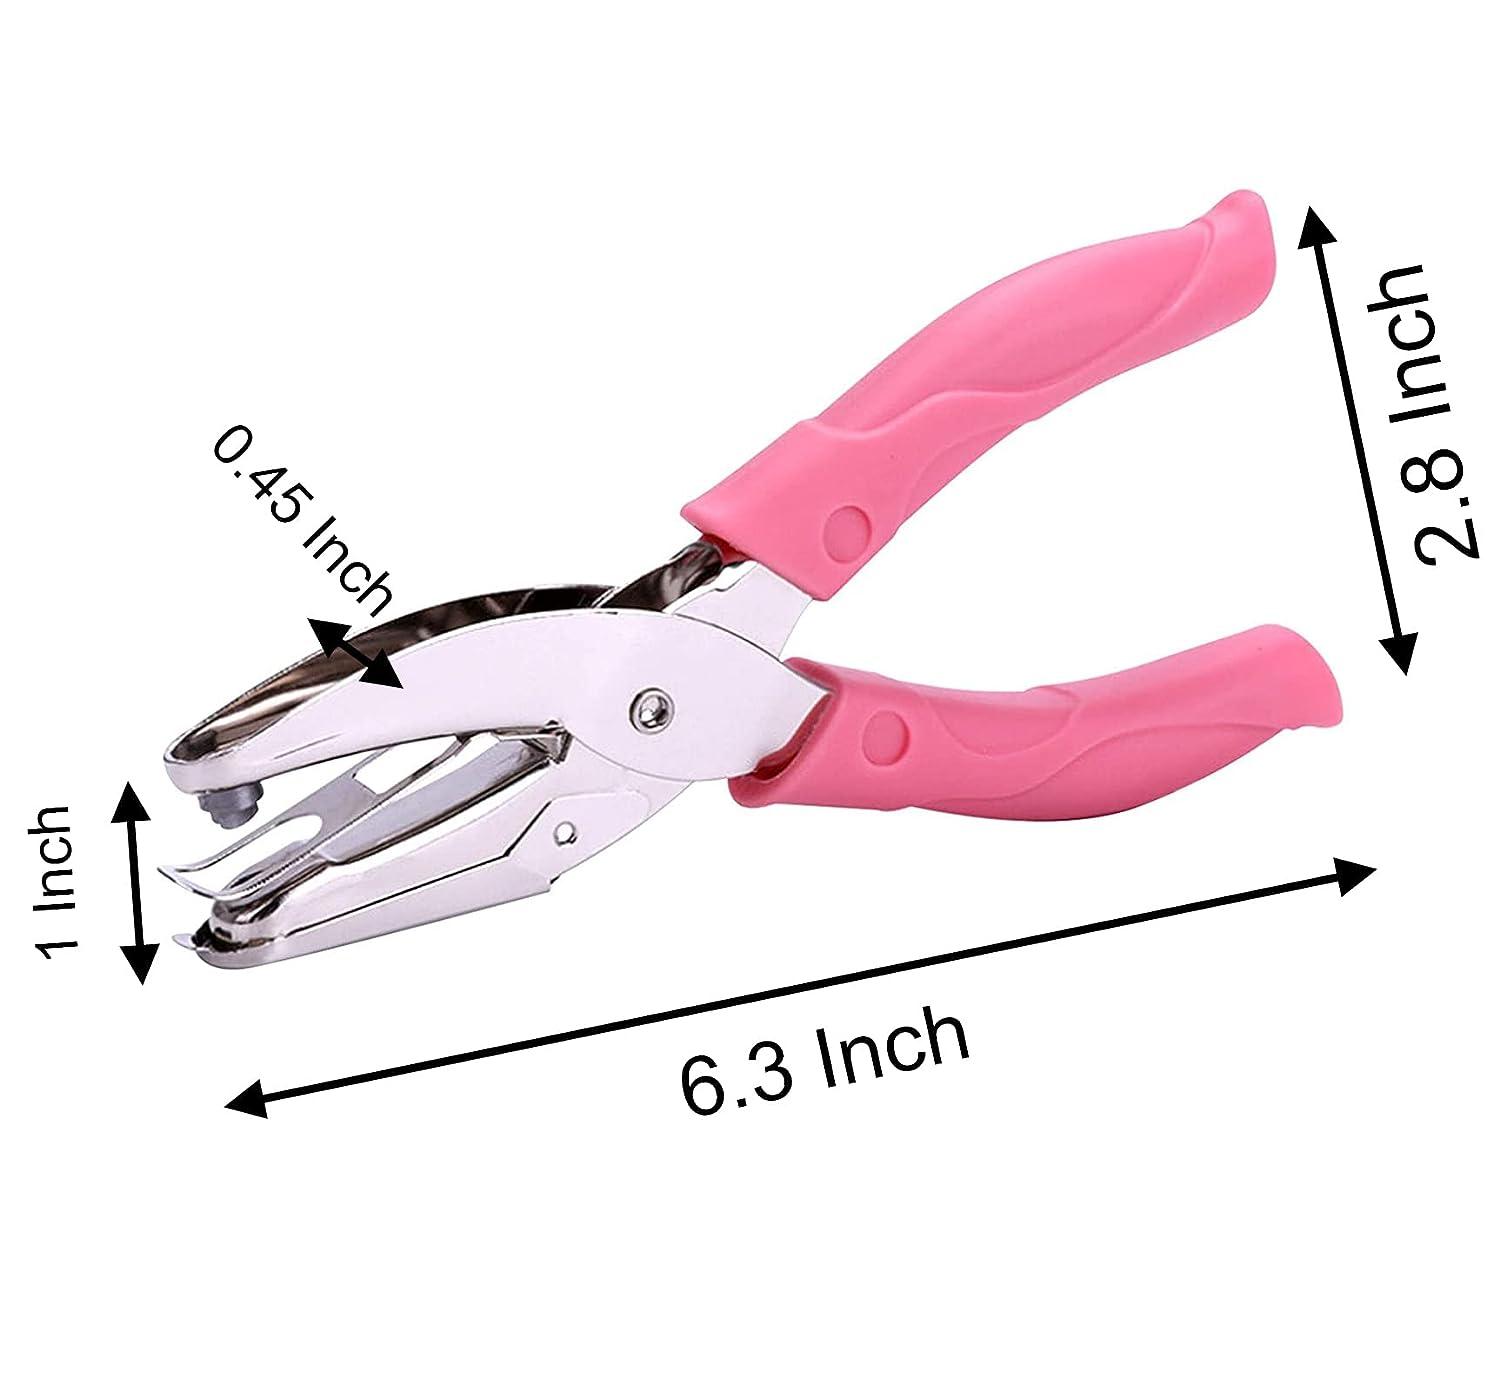 Star Shape Single Paper Hole Punch 1 Pack 6.3 Inch Length 1/4 Inch of  Diameter of Hole Handheld Puncher with Pink Soft Thick Leather Cover(Star  1/4 inch)